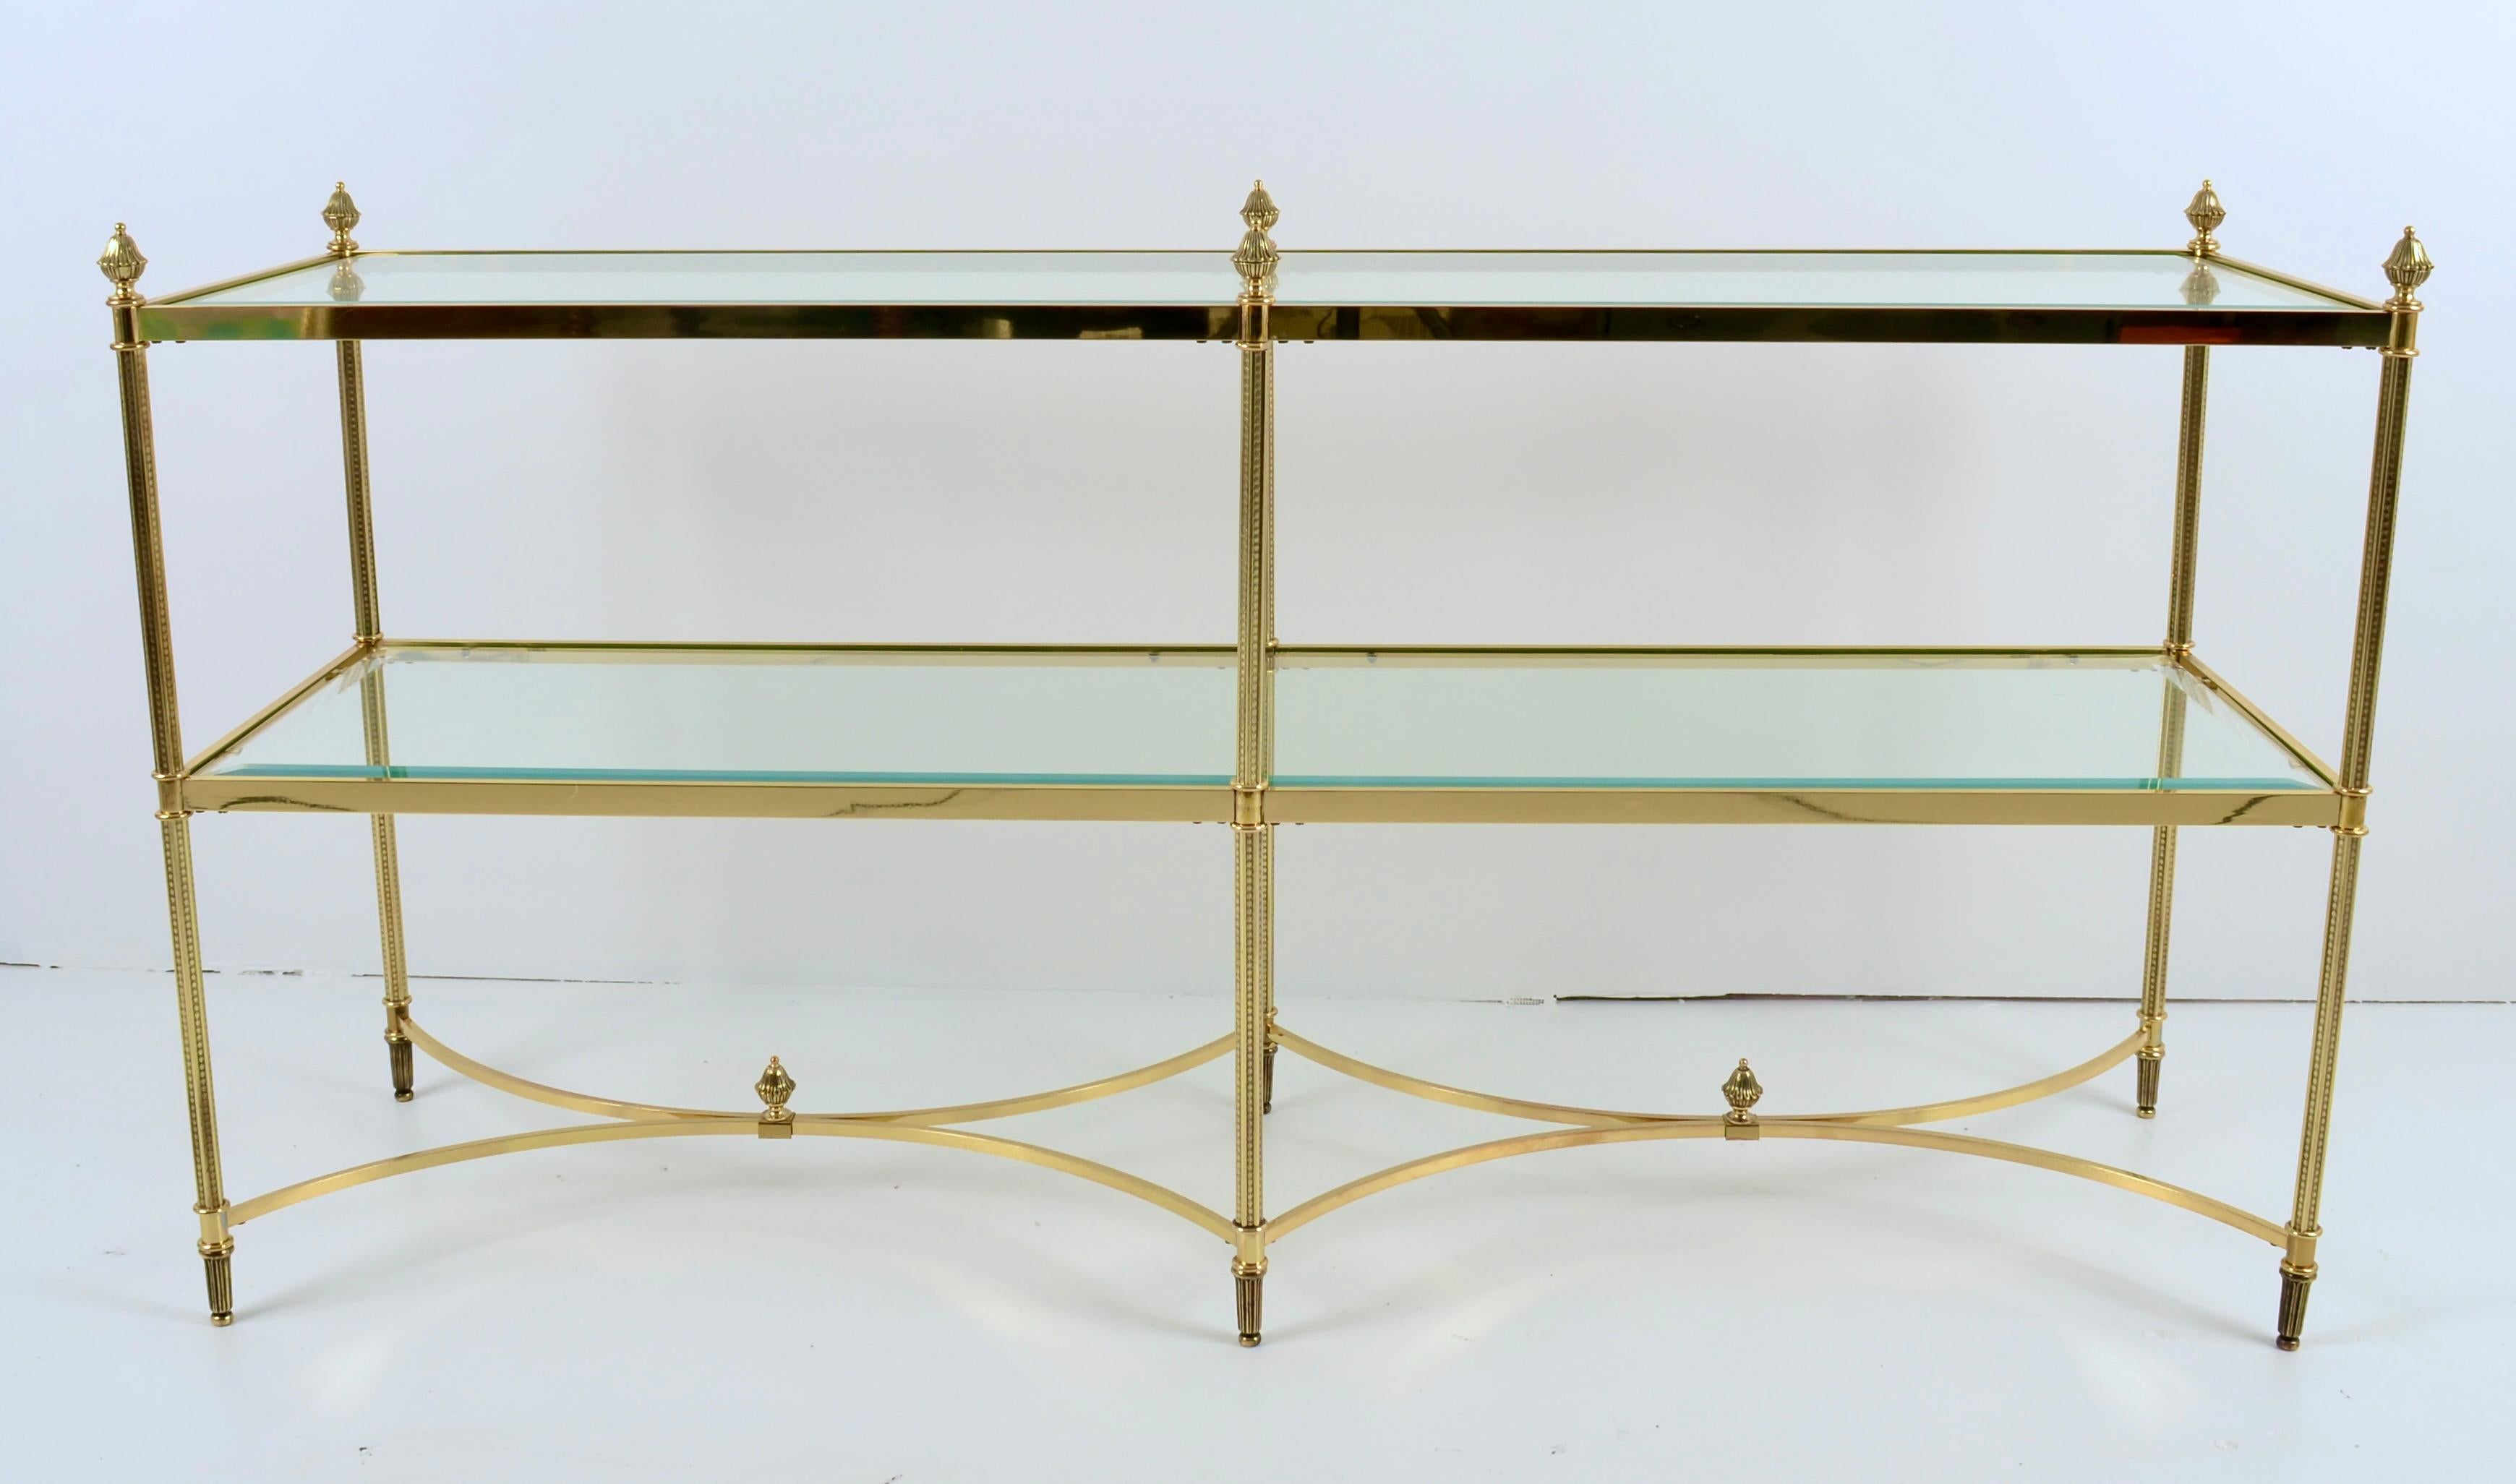 Neoclassical Neo-classical Form Sofa Table in Polished Brass w/ Beveled Glass Shelves For Sale